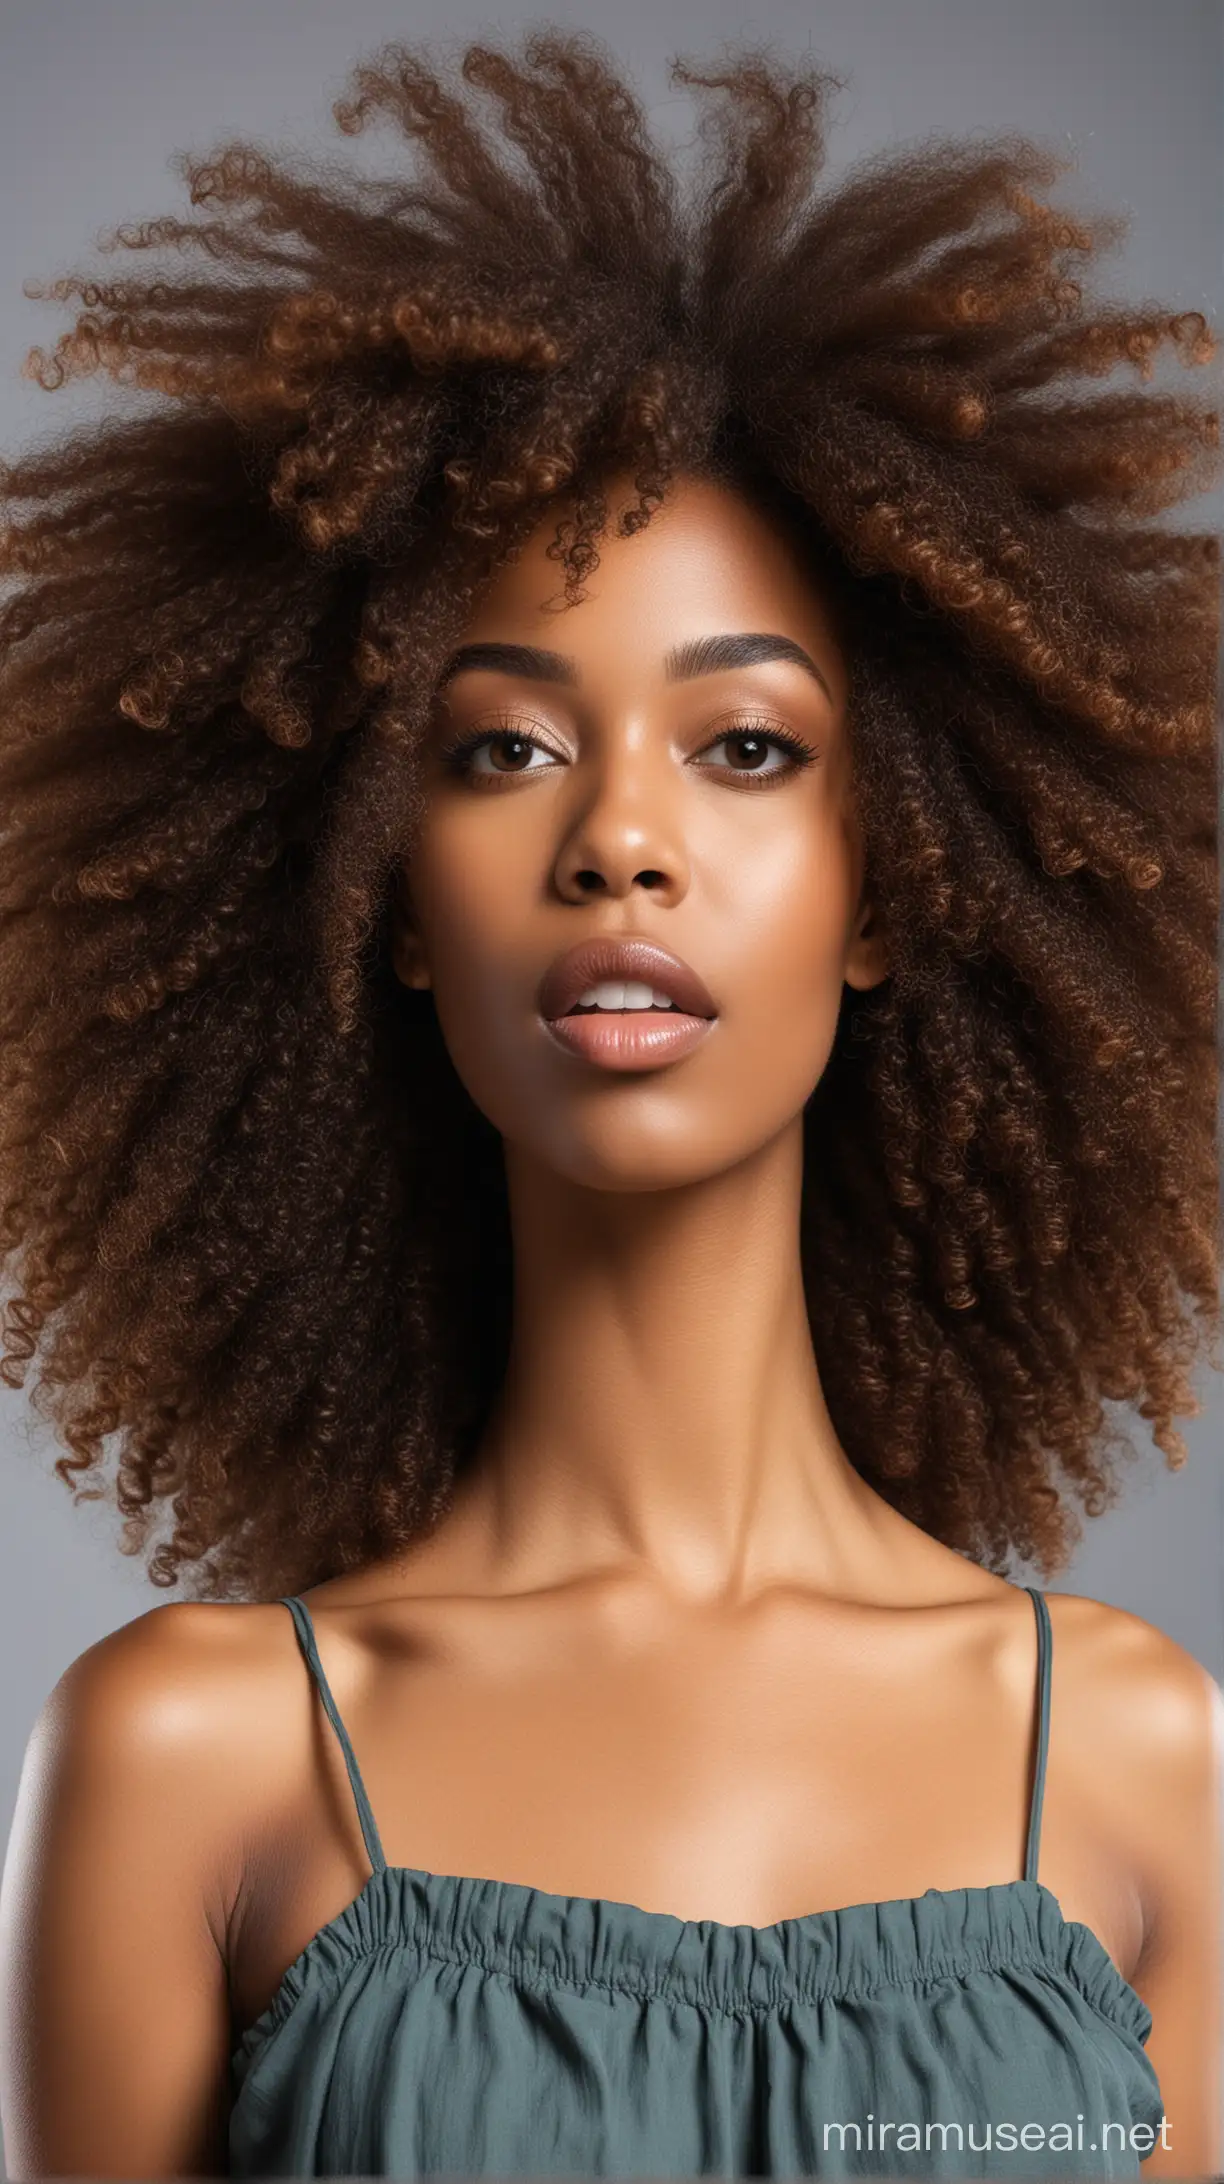 Stunning Afro Hair Model Embracing Natural Beauty